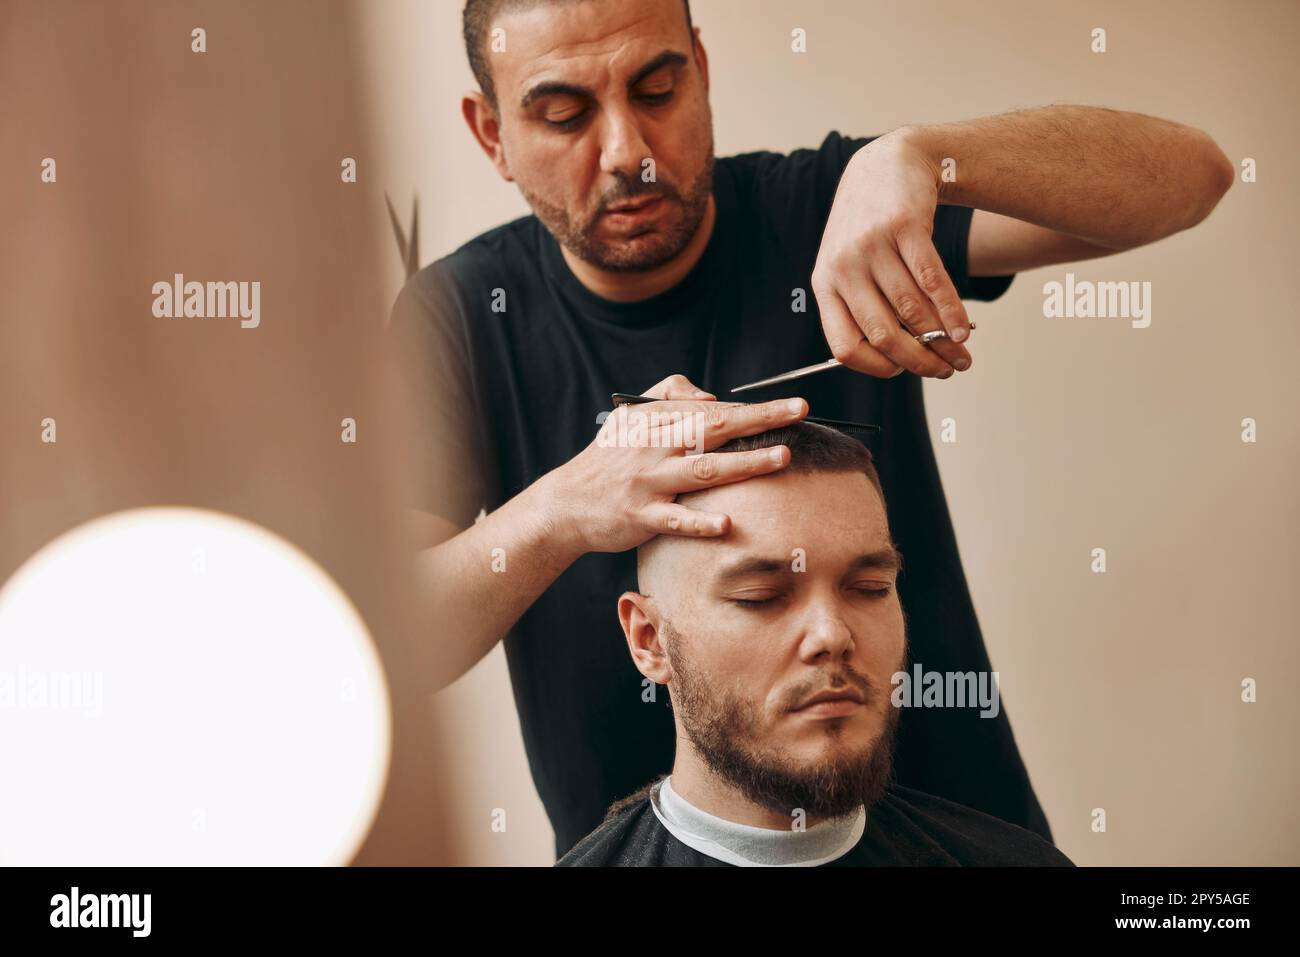 hairdresser does hairstyle with scissors in barber shop Stock Photo